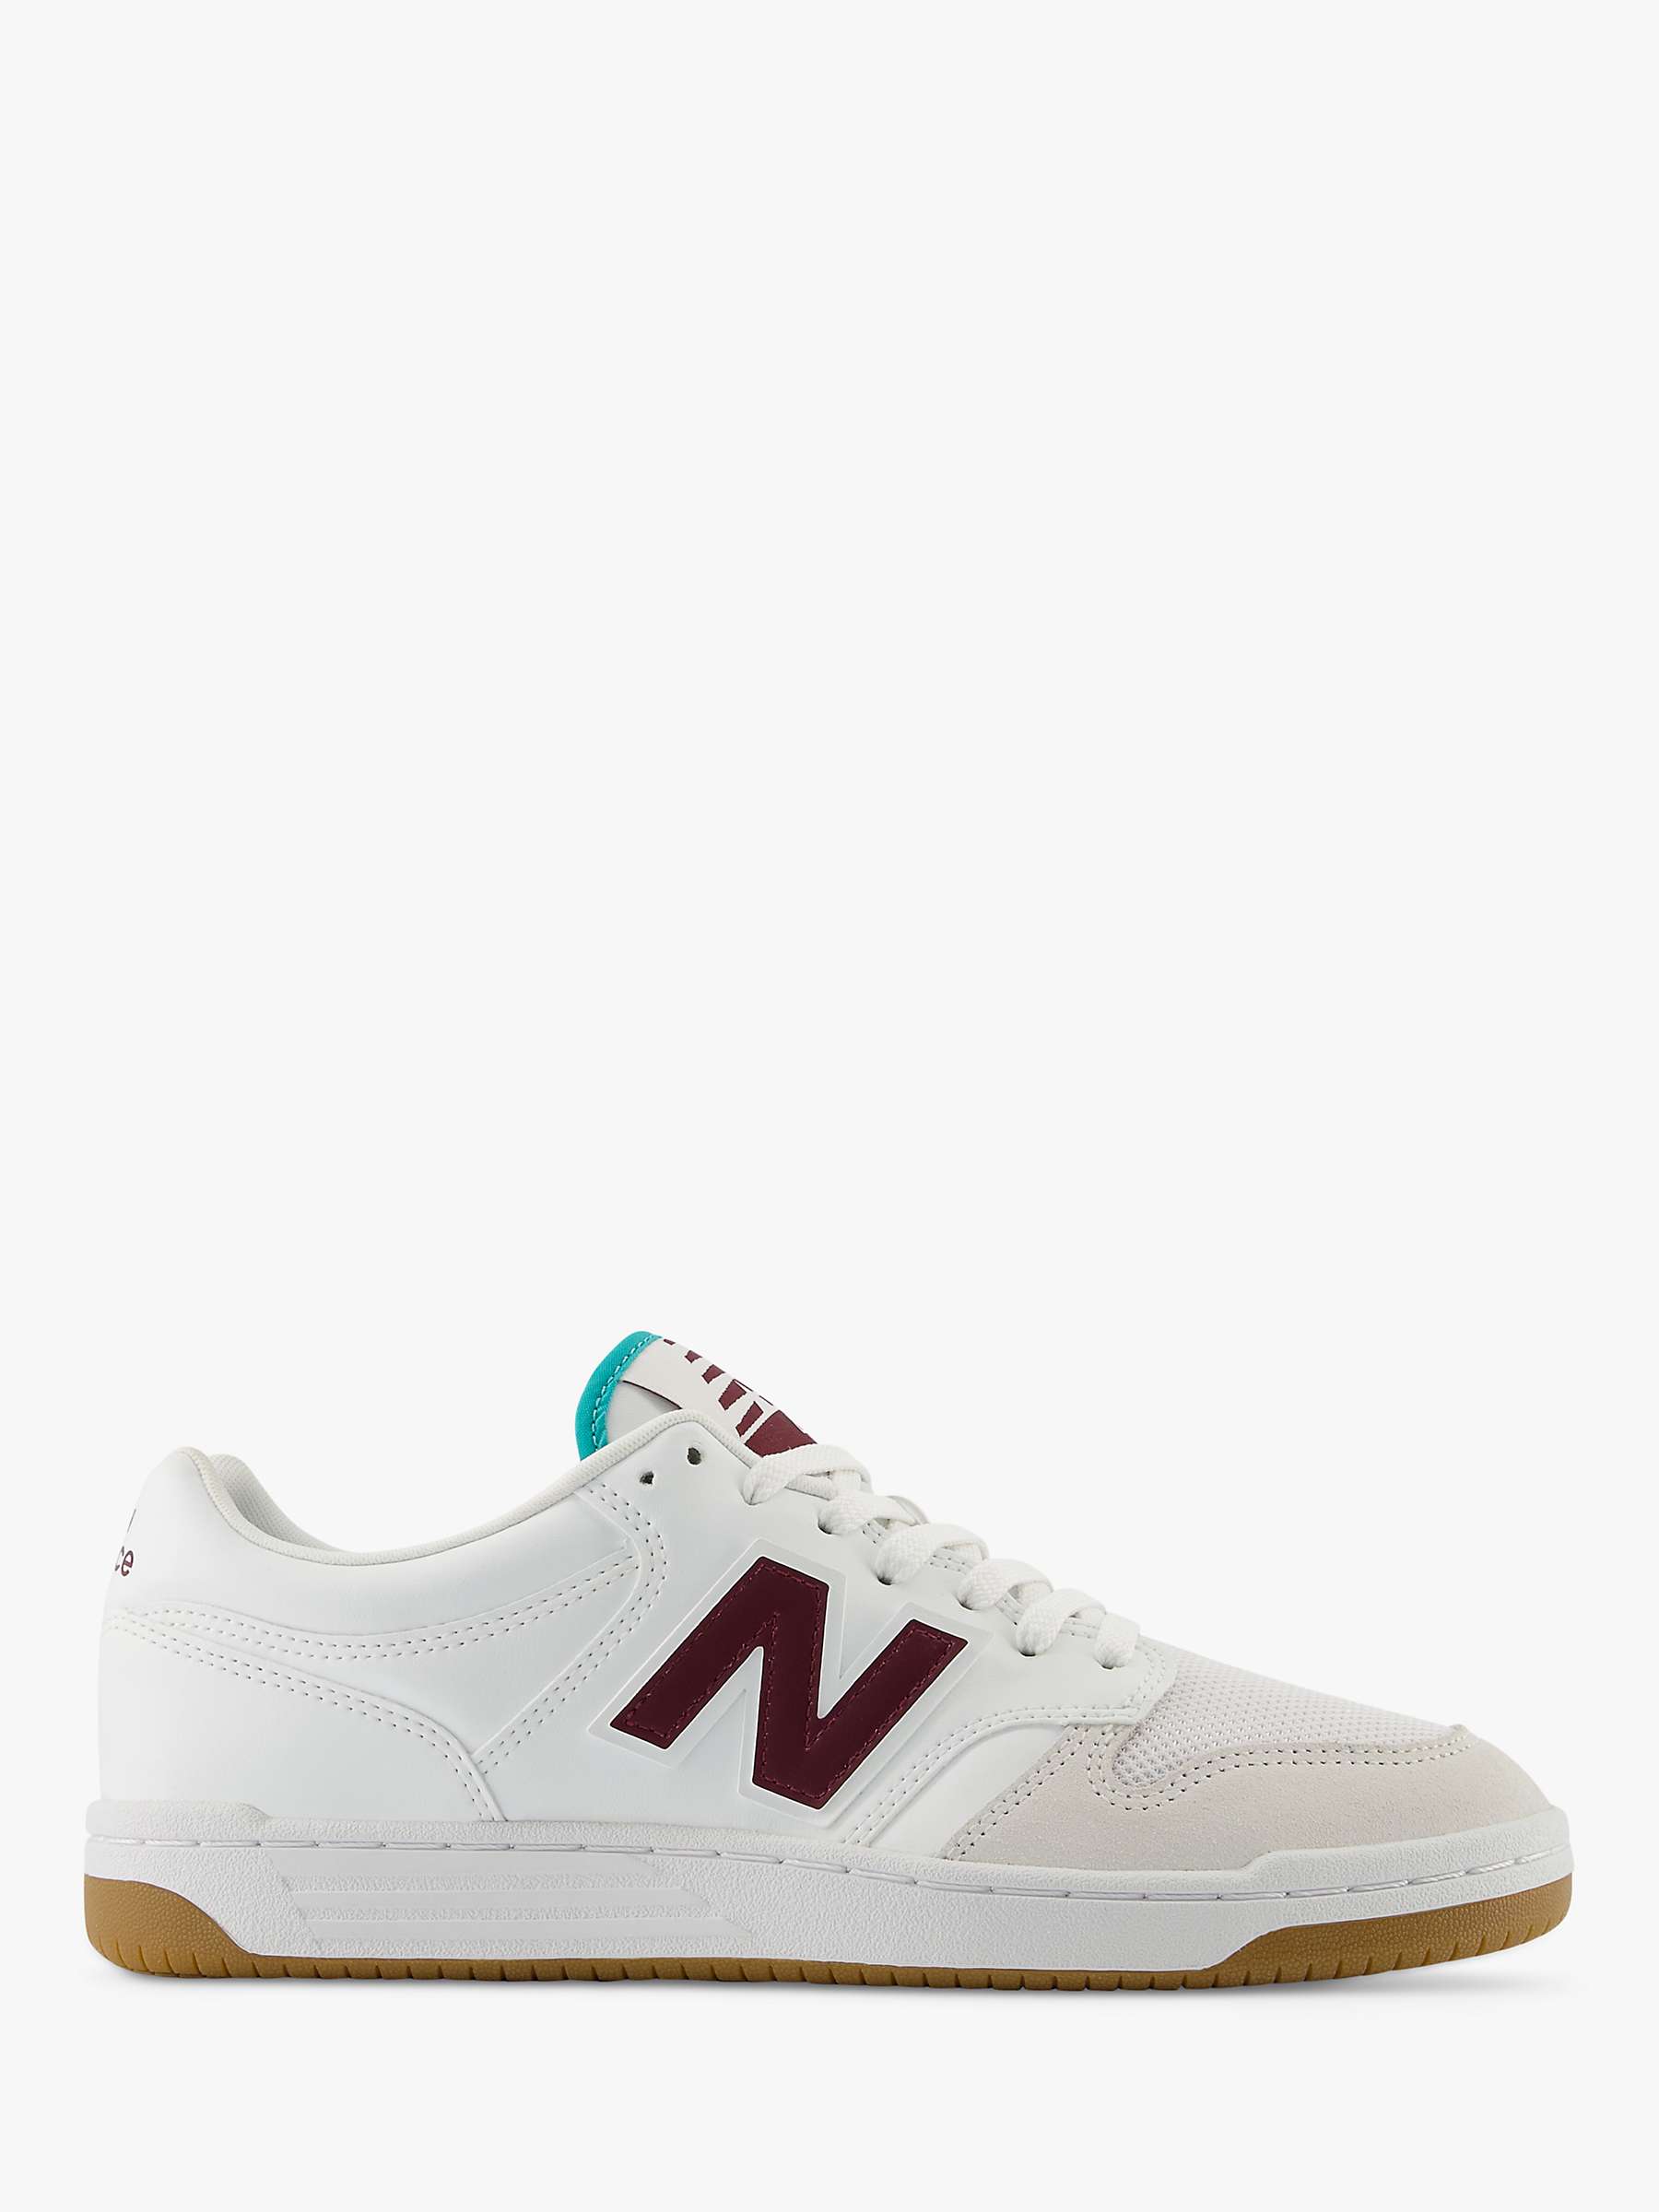 Buy New Balance BB480 Trainers, White/Black Online at johnlewis.com